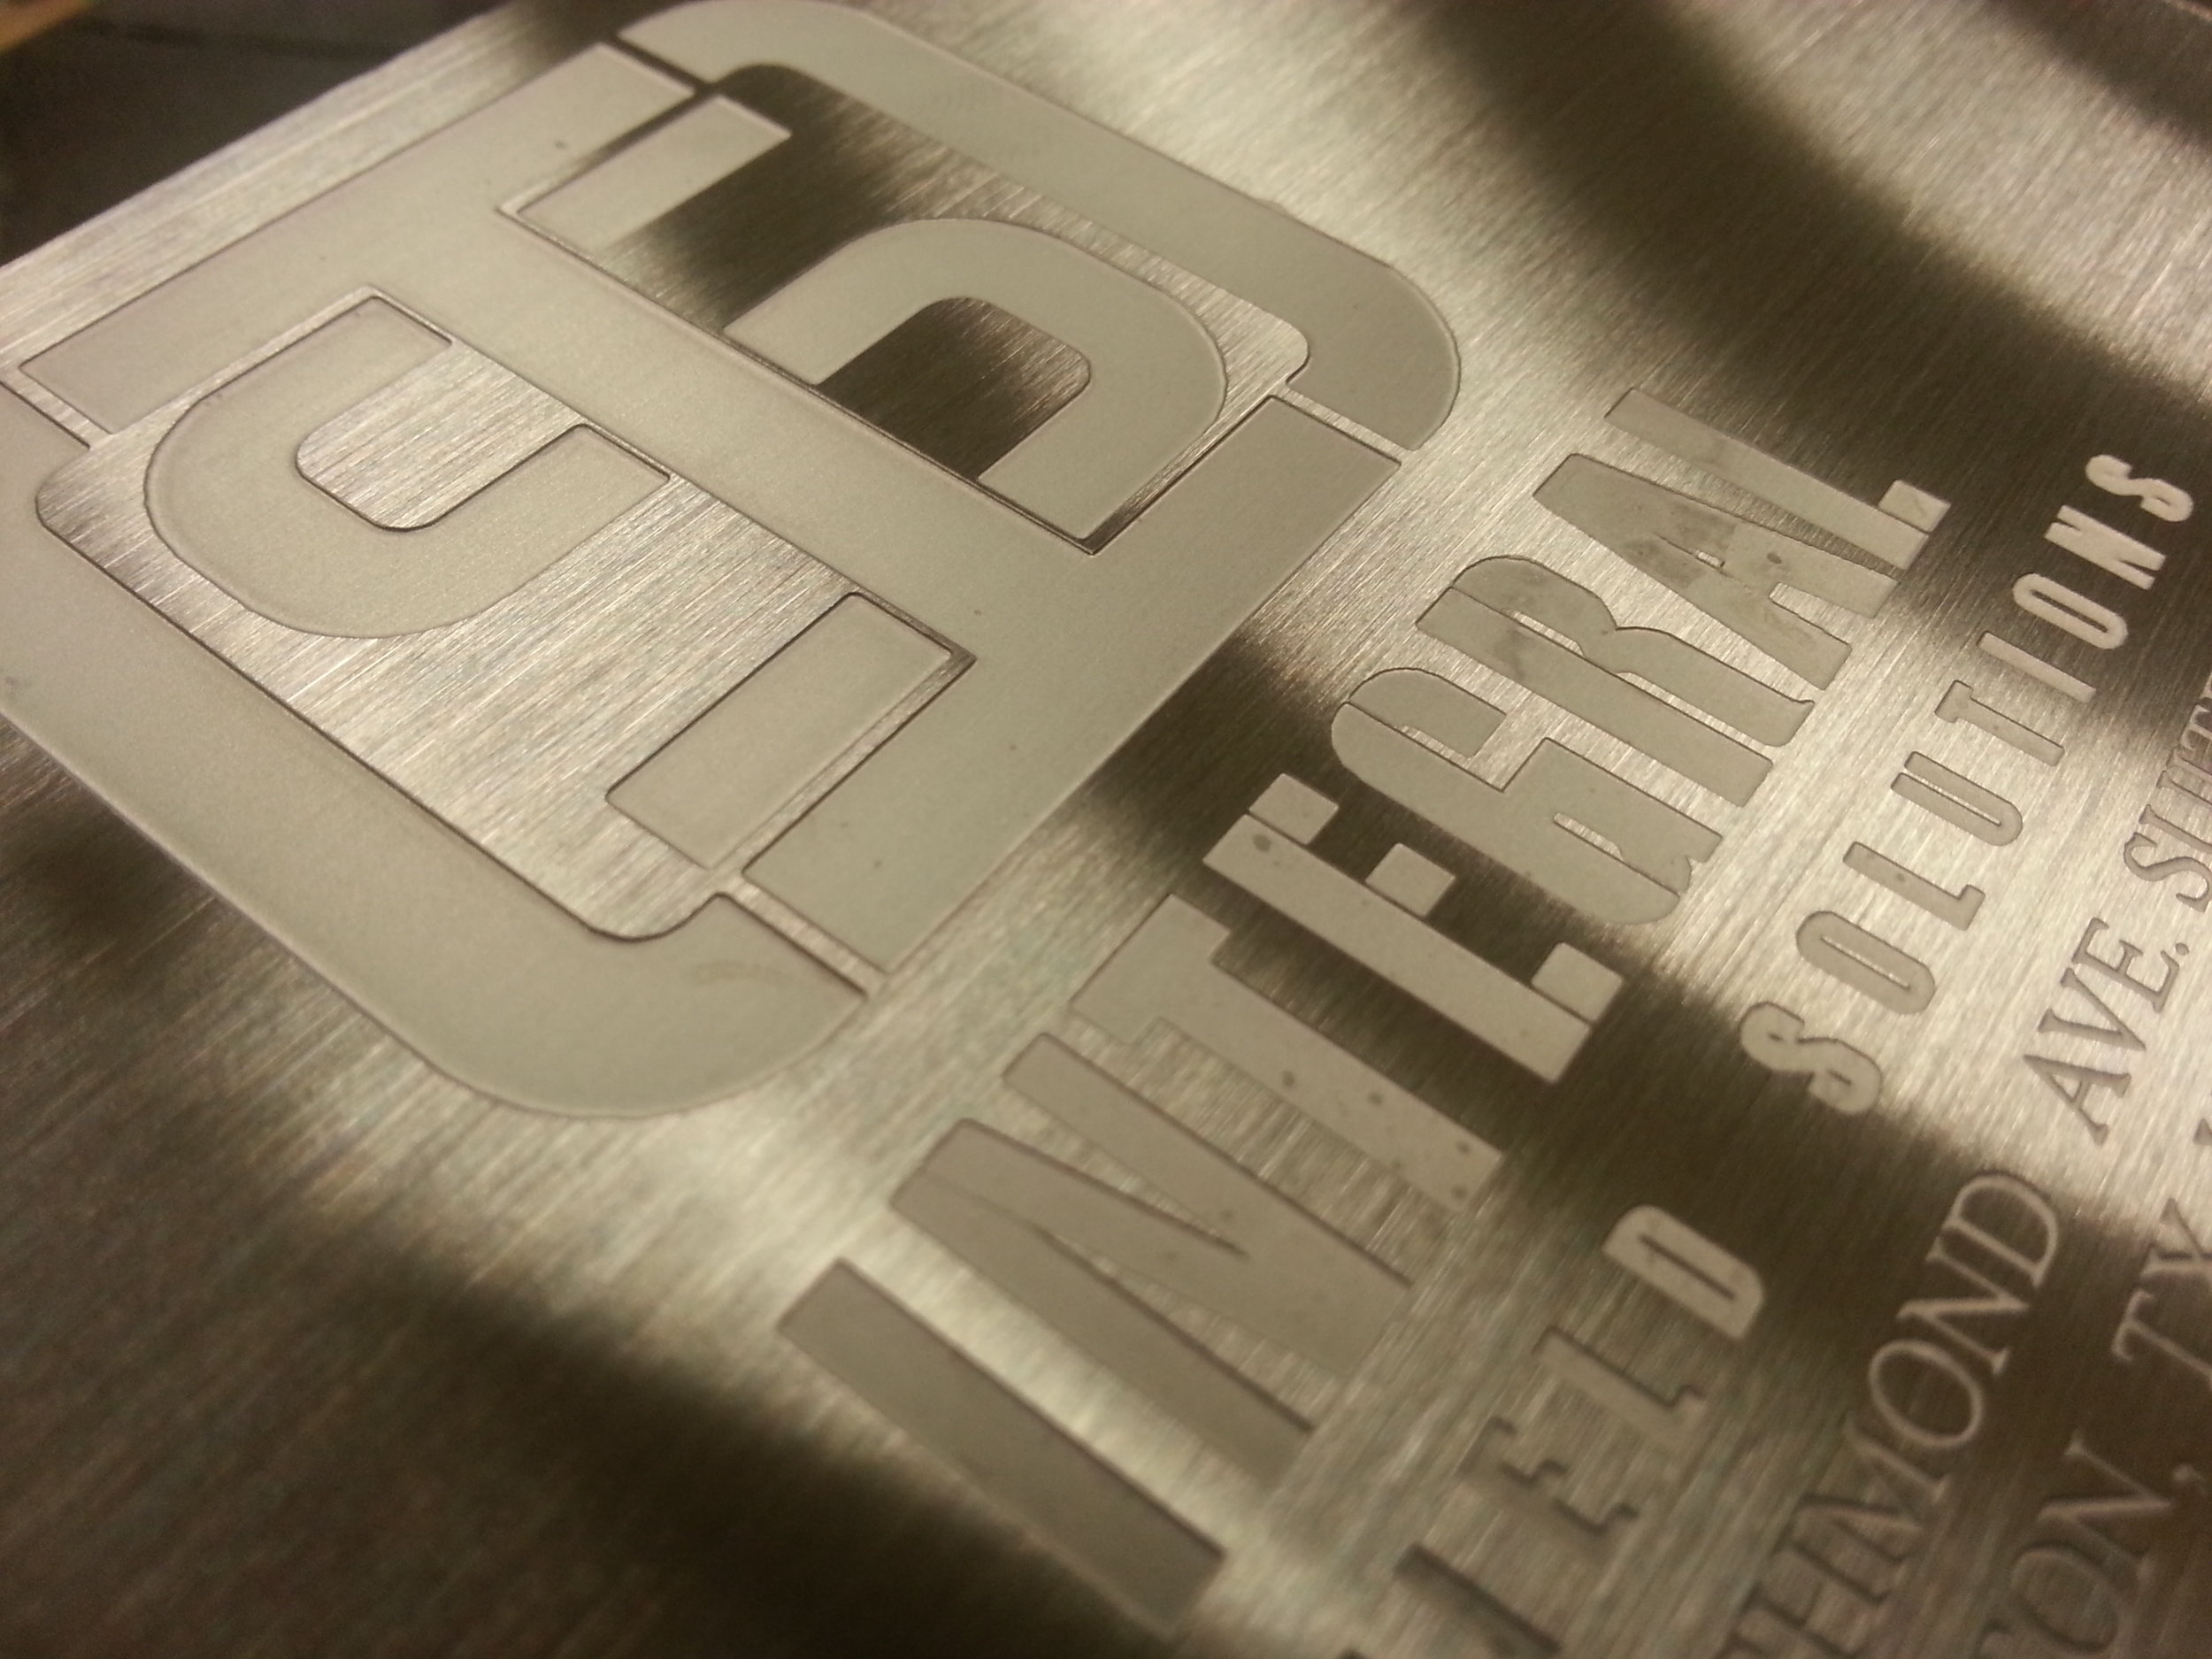 Engrave It Houston — Laser Engrave your Tools!